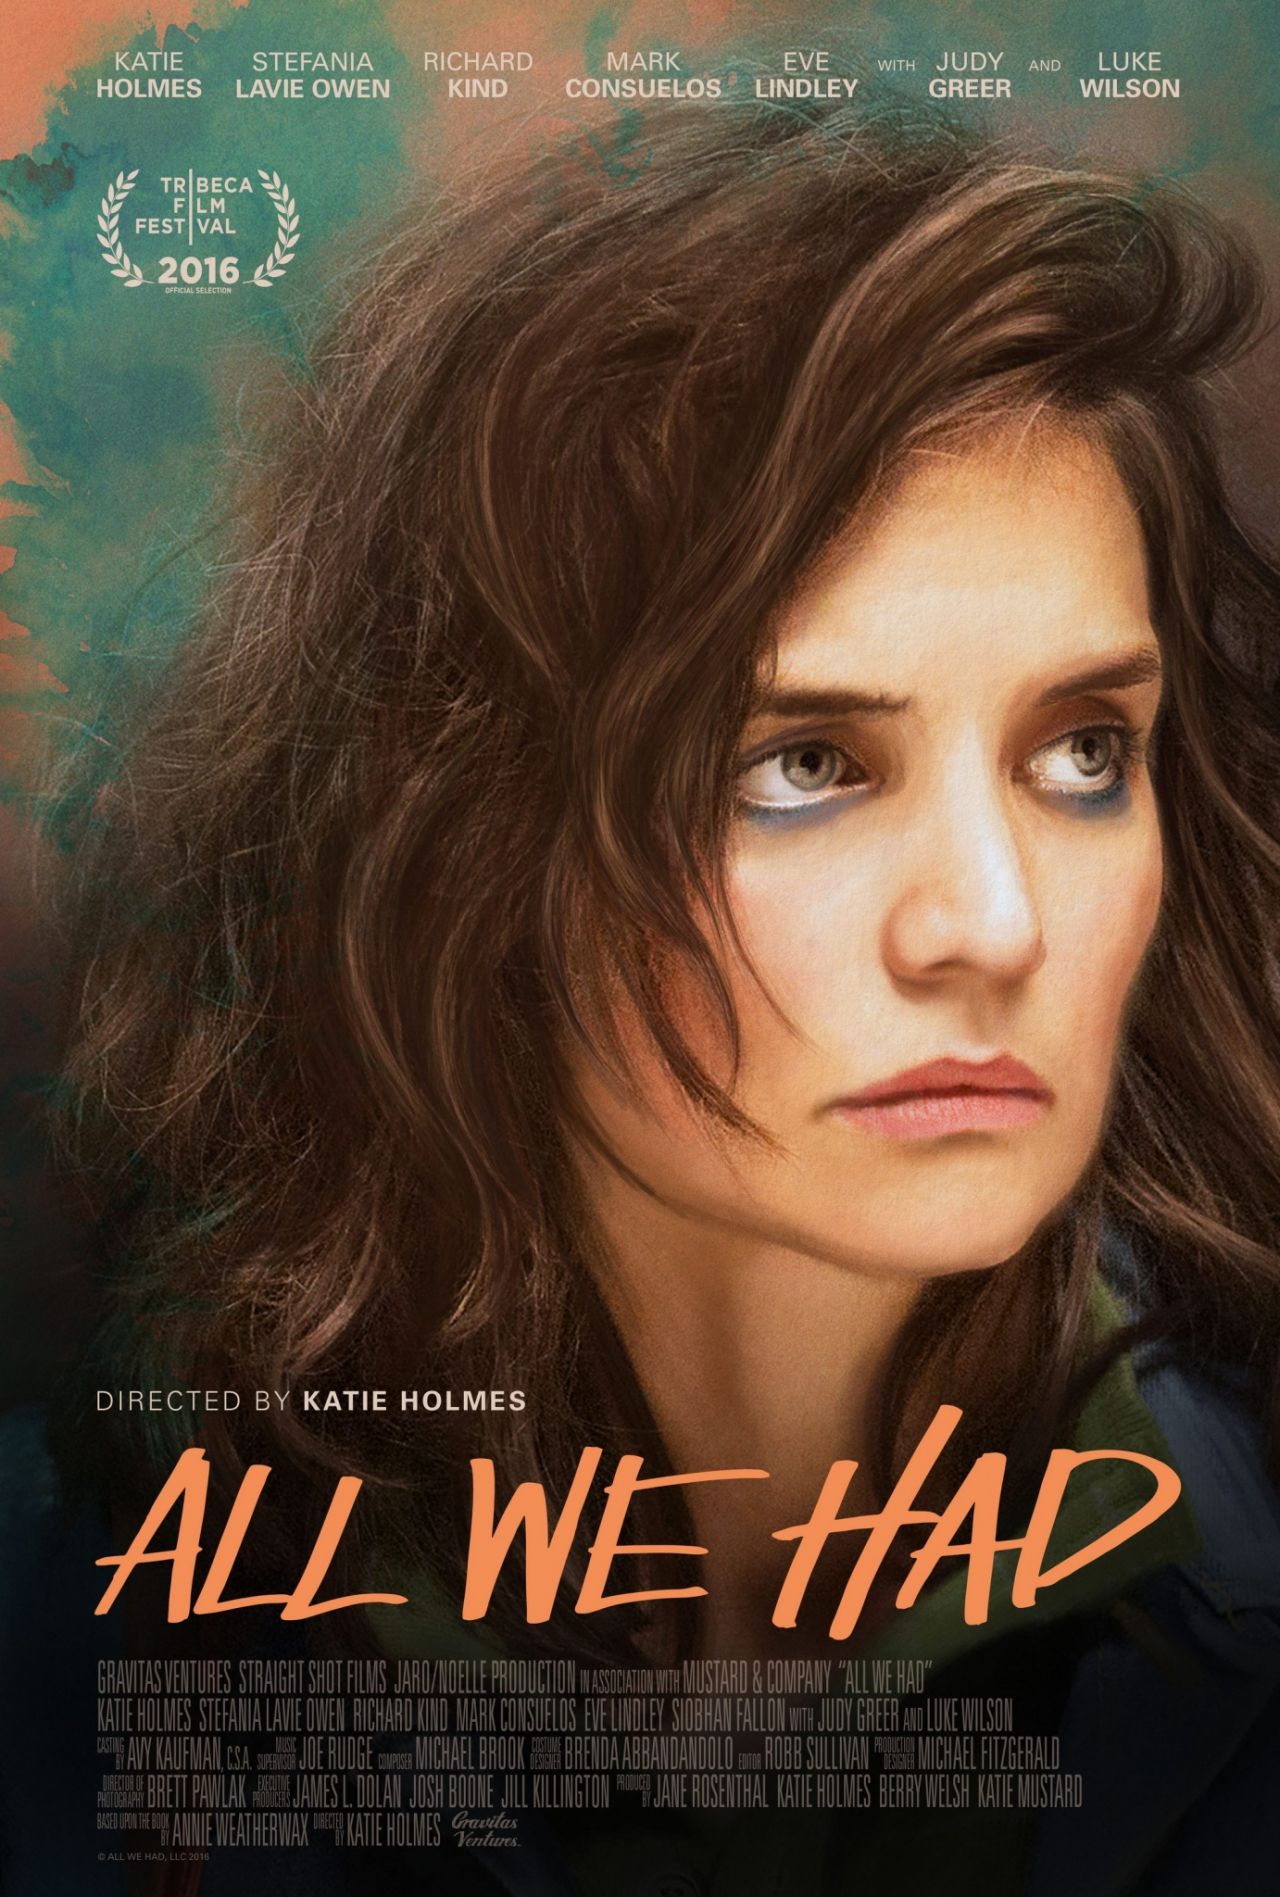 Katie Holmes 'All We Had' Poster, Promotional Photos and Trailer